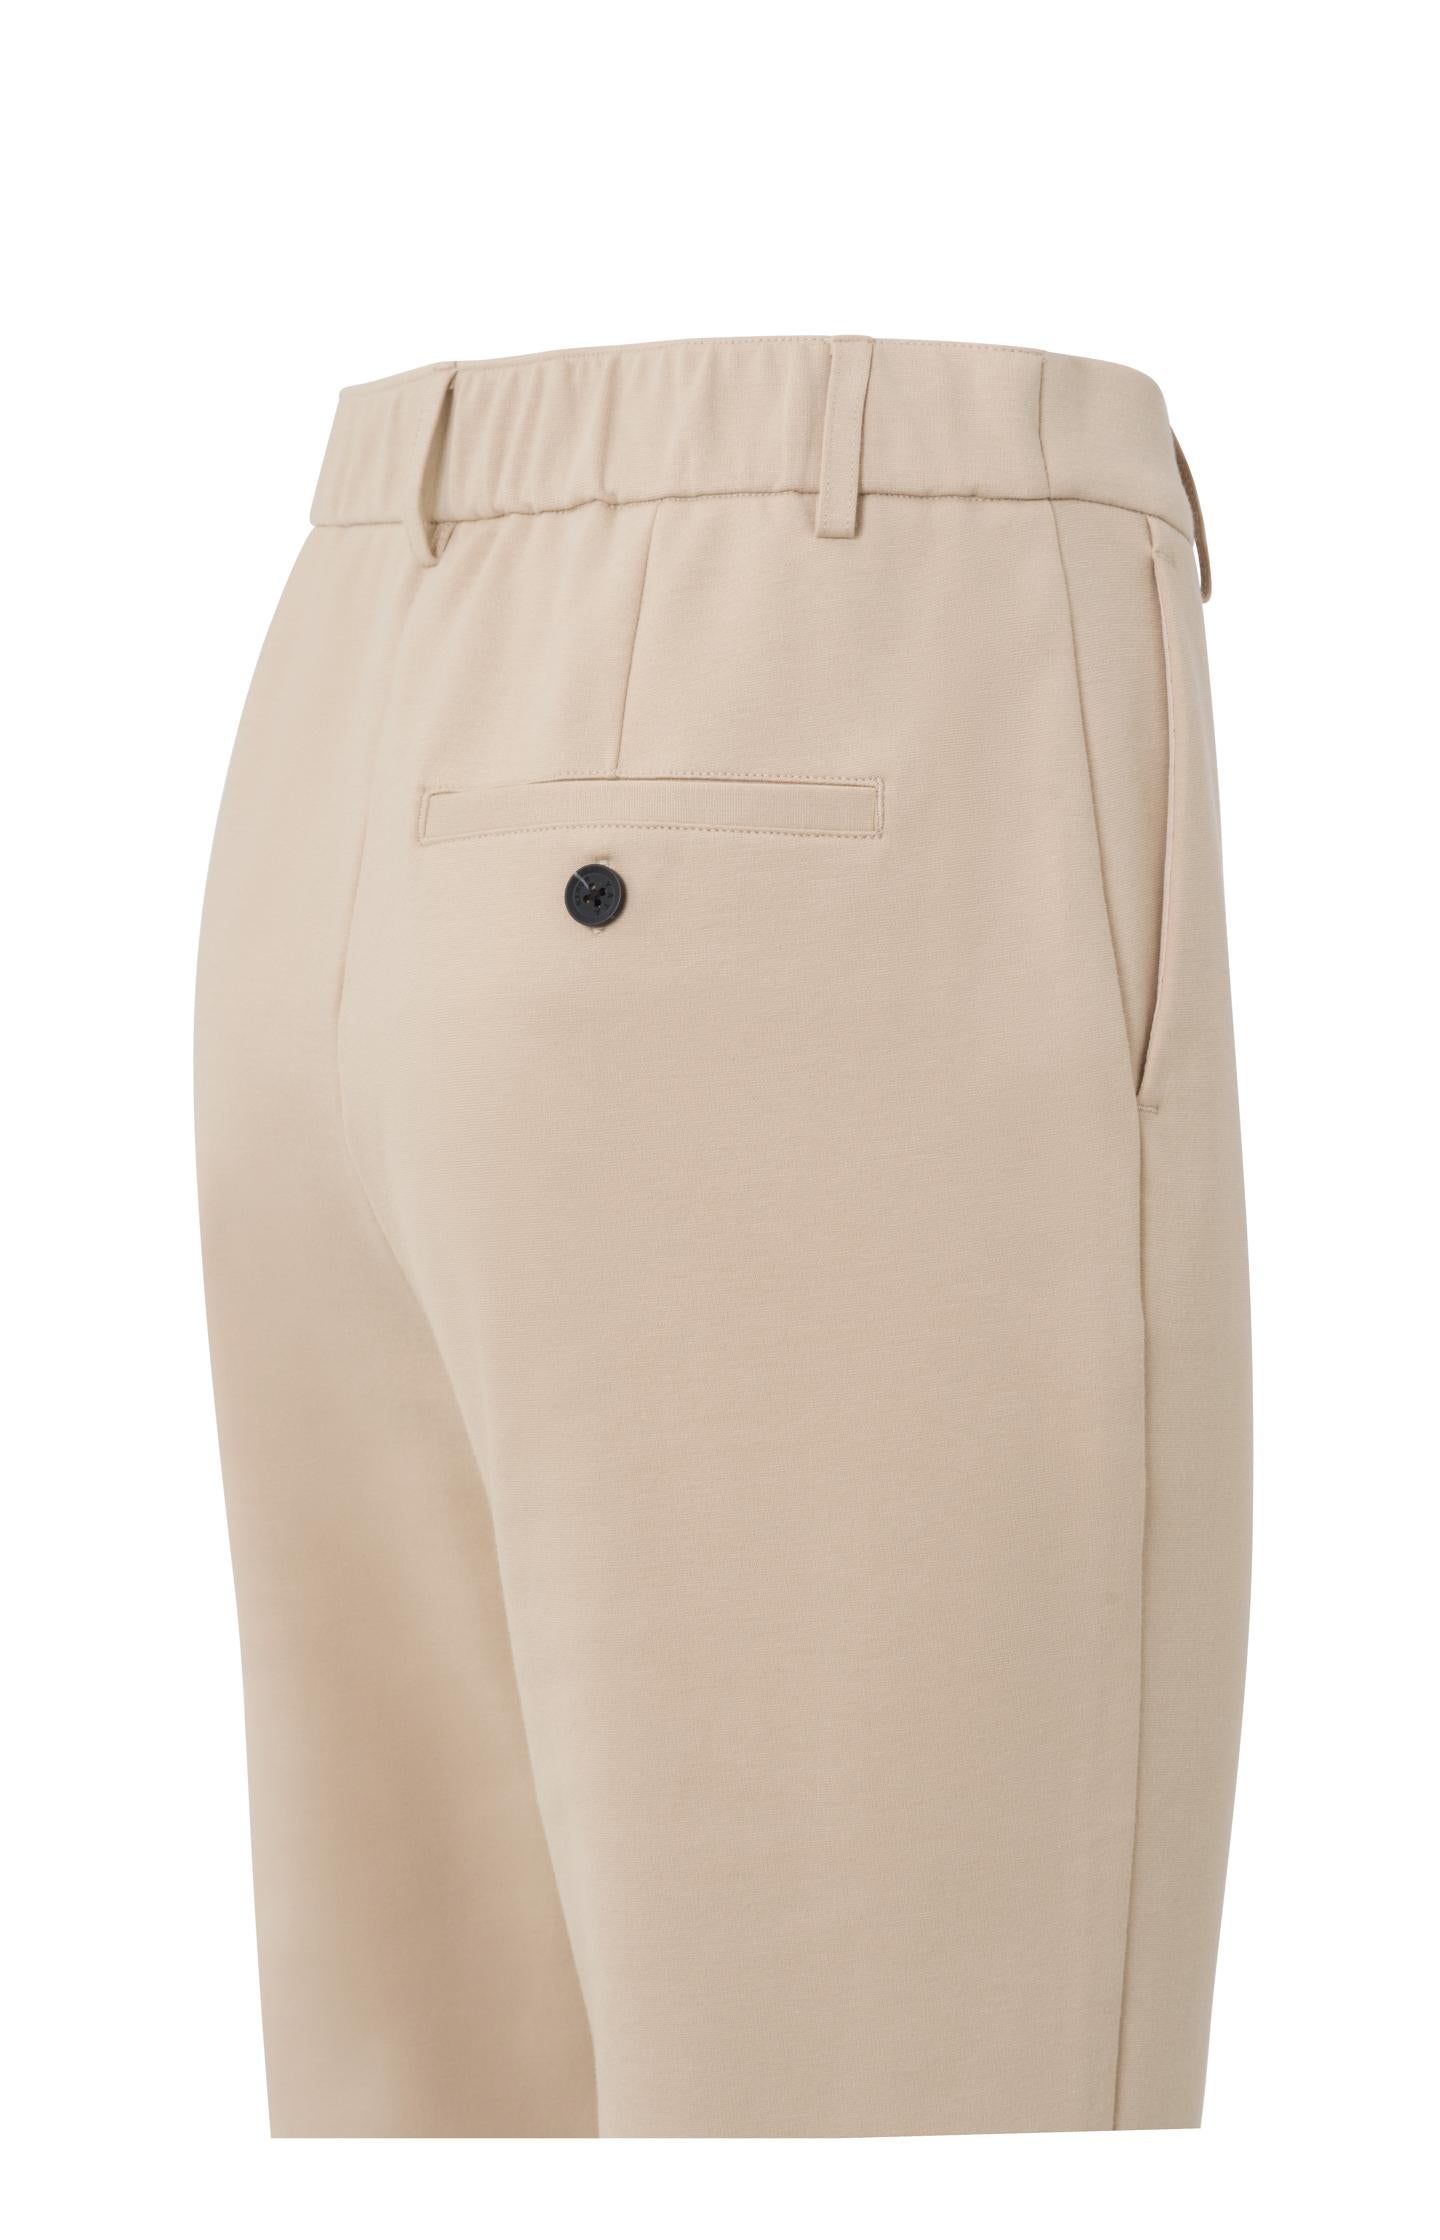 Jersey chino with straight leg, side pockets and mid waist